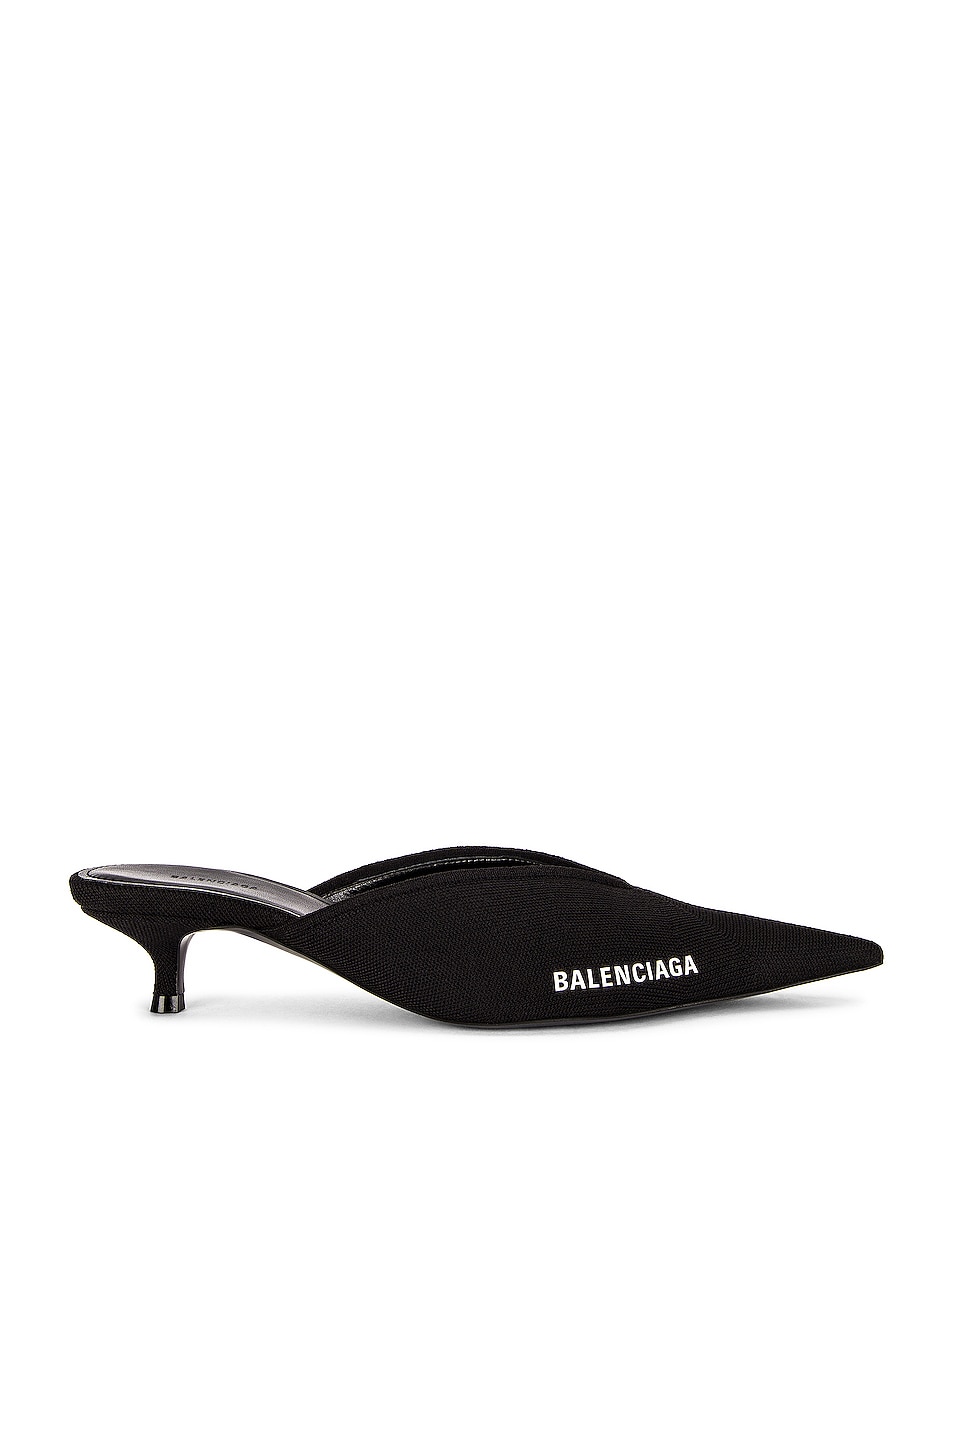 Image 1 of Balenciaga Knife Knit Mules in Black & White